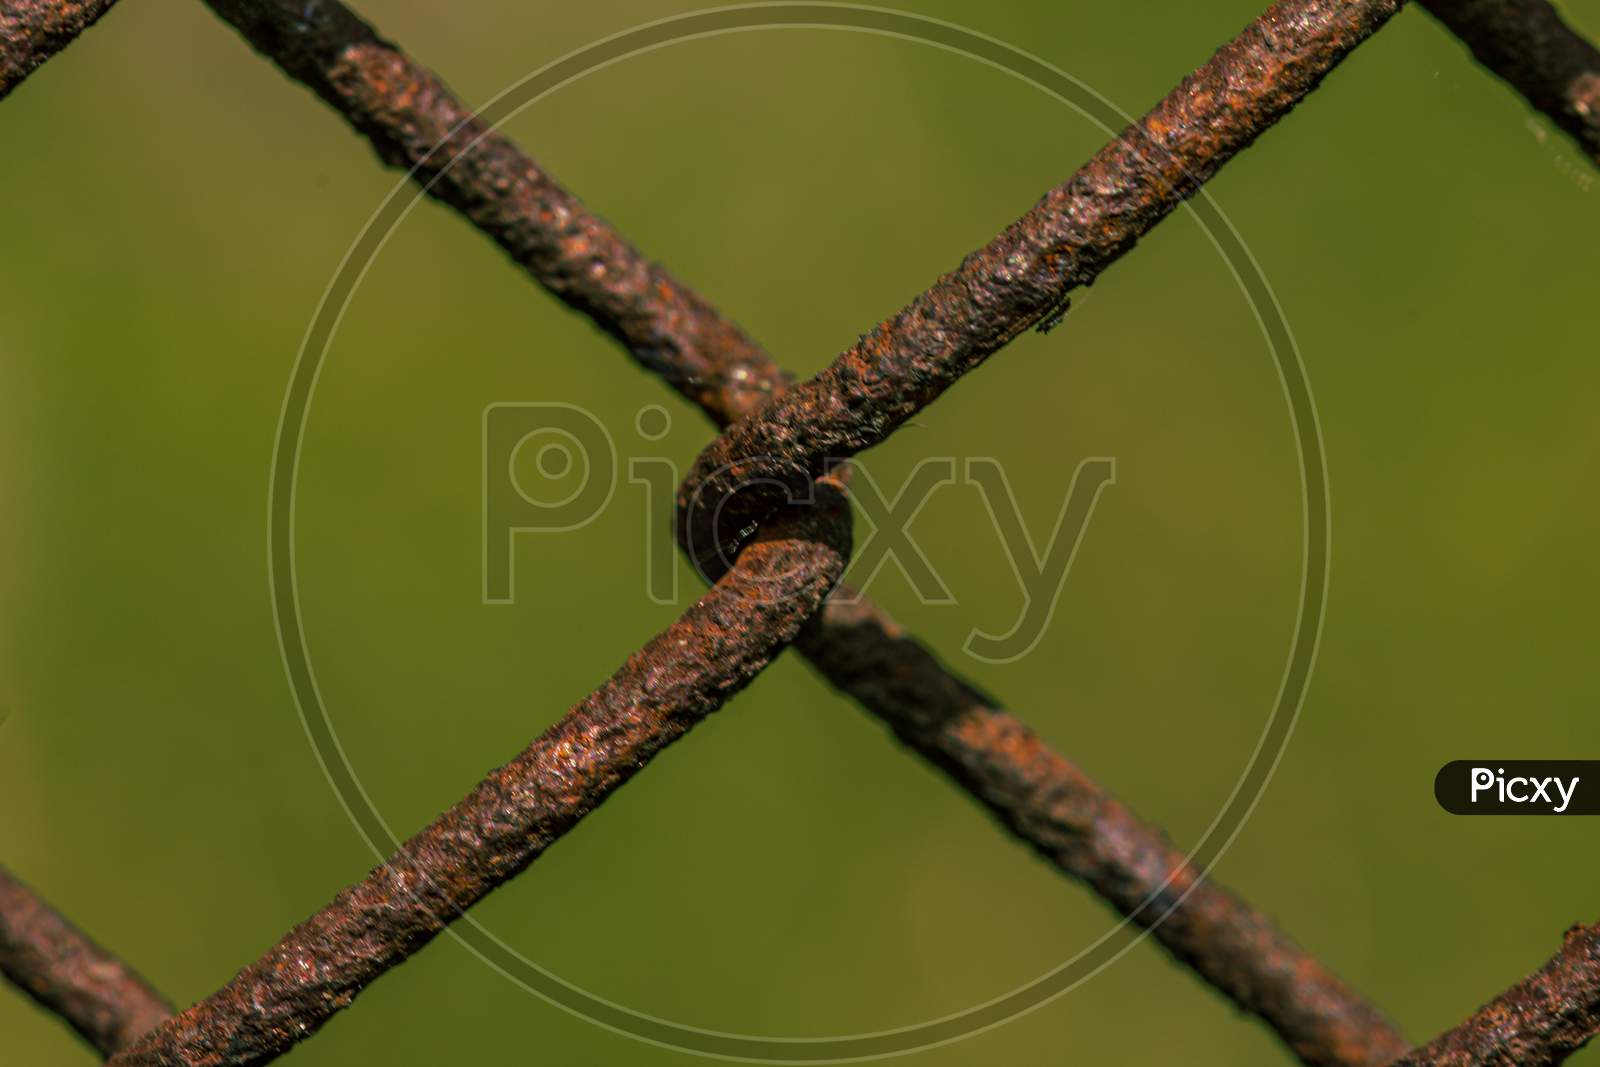 Rusty Metal Fence, Weave Close Up